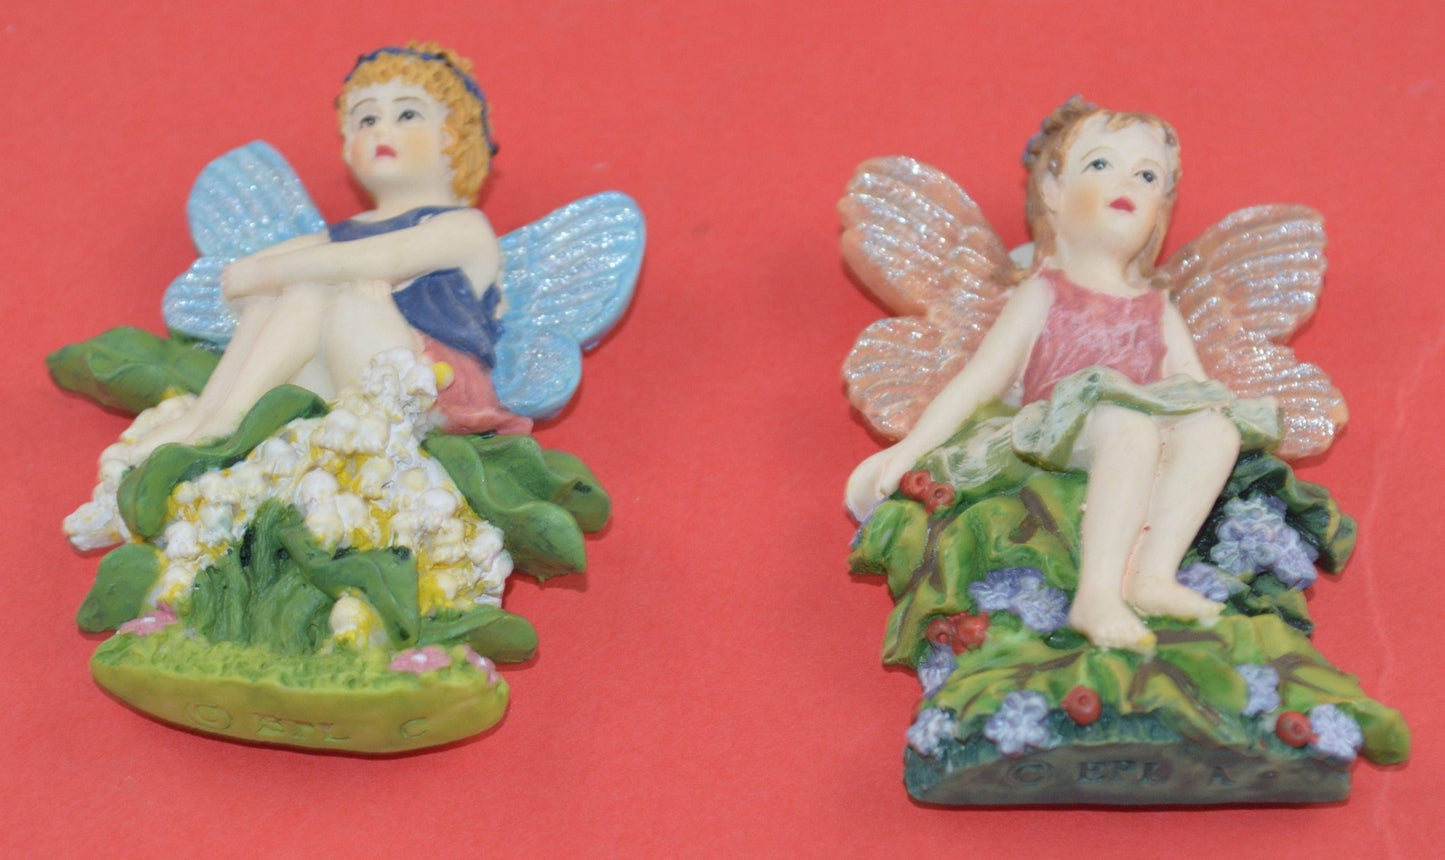 SIX DIFFERENT FAIRY FRIDGE MAGNETS HARVEST HAMLET COLLECTION(SHOP CLEARANCE) - TMD167207